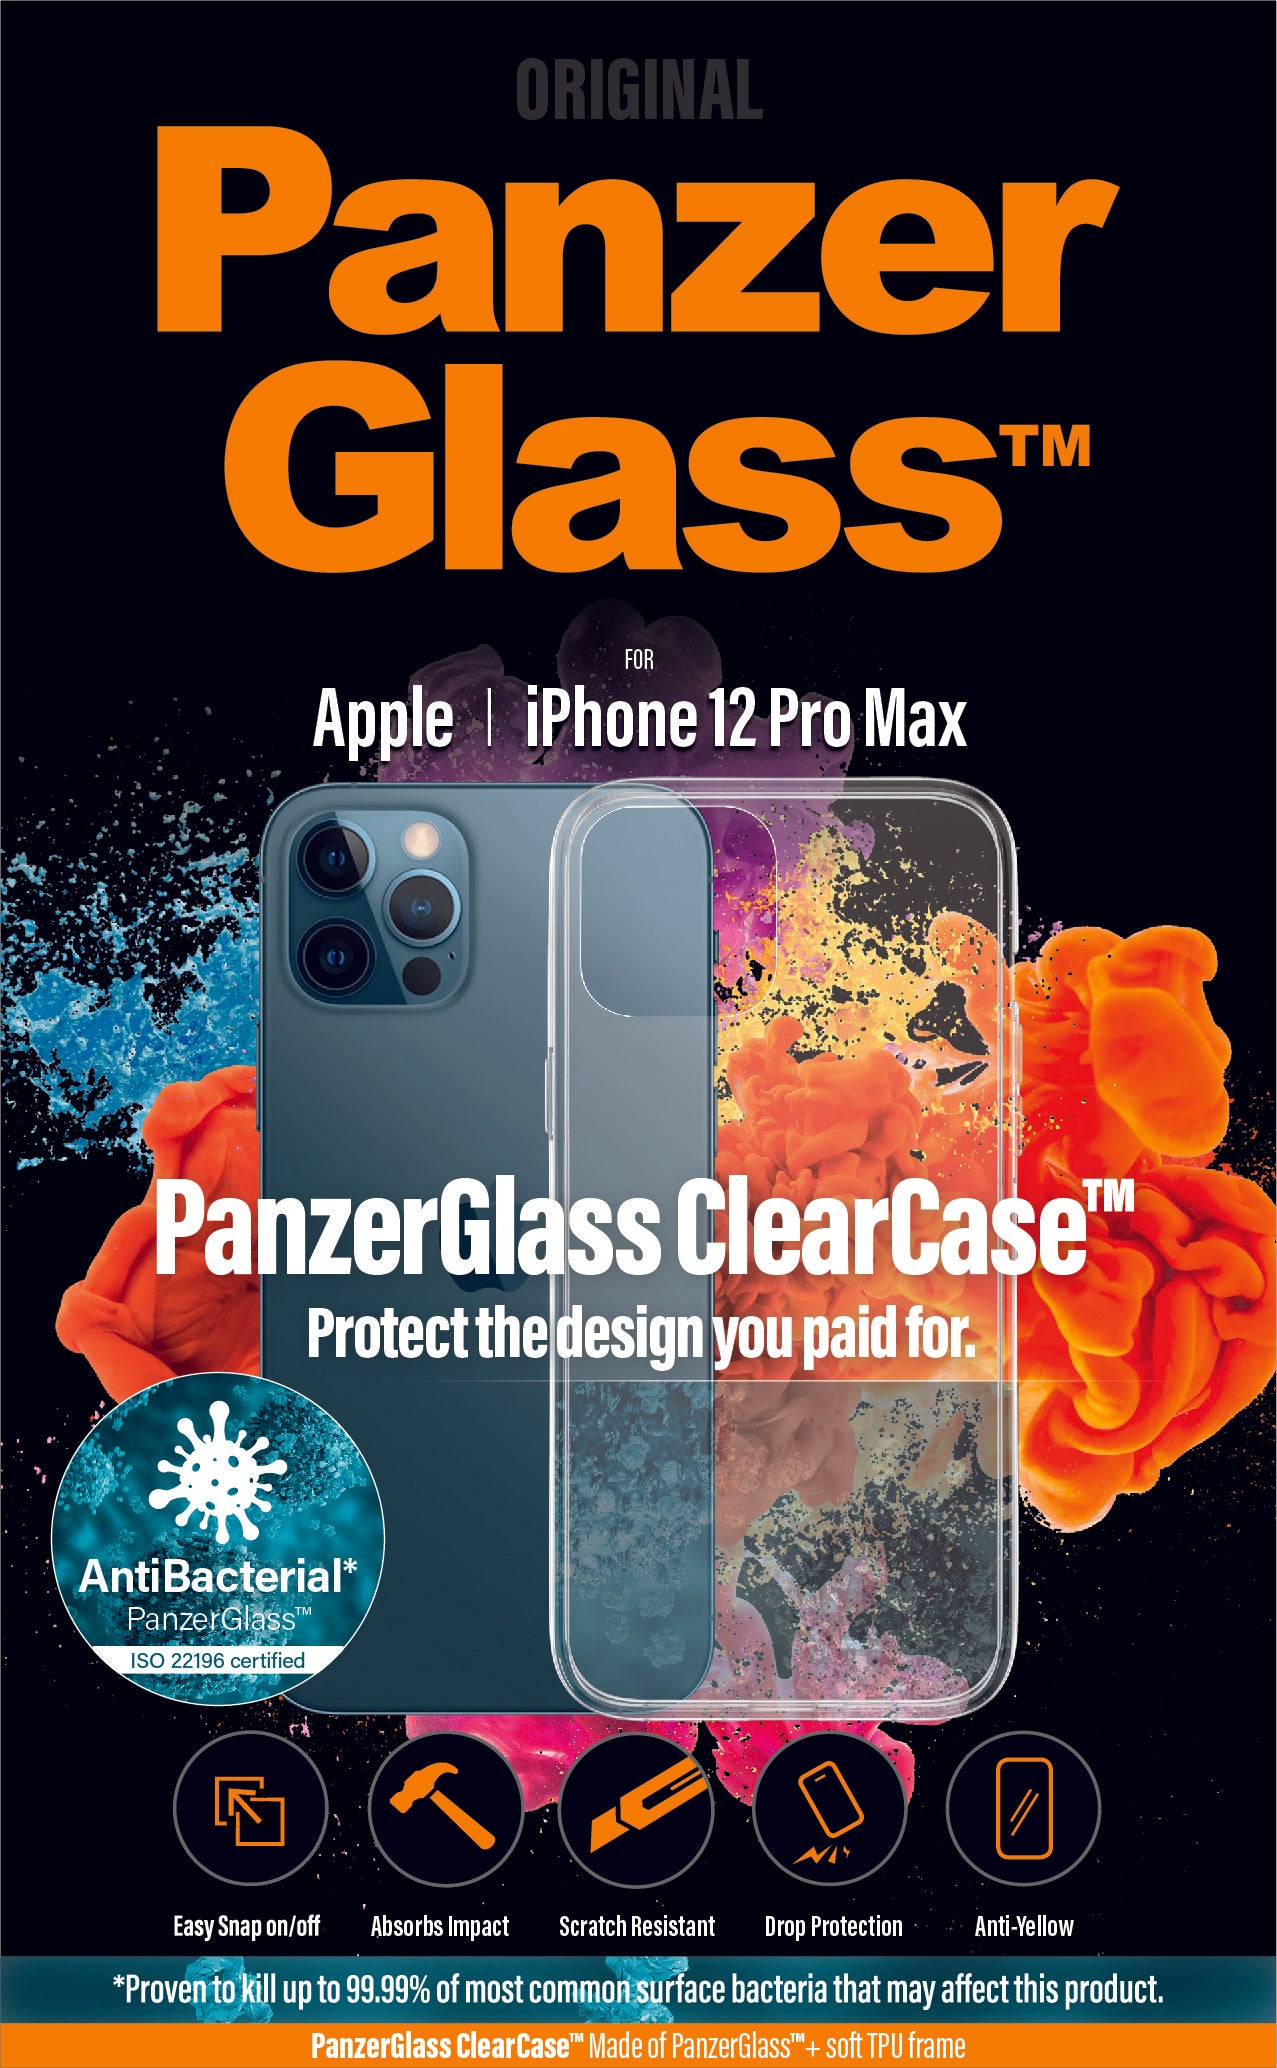 PanzerGlass ClearCase for iPhone 12 Pro Max